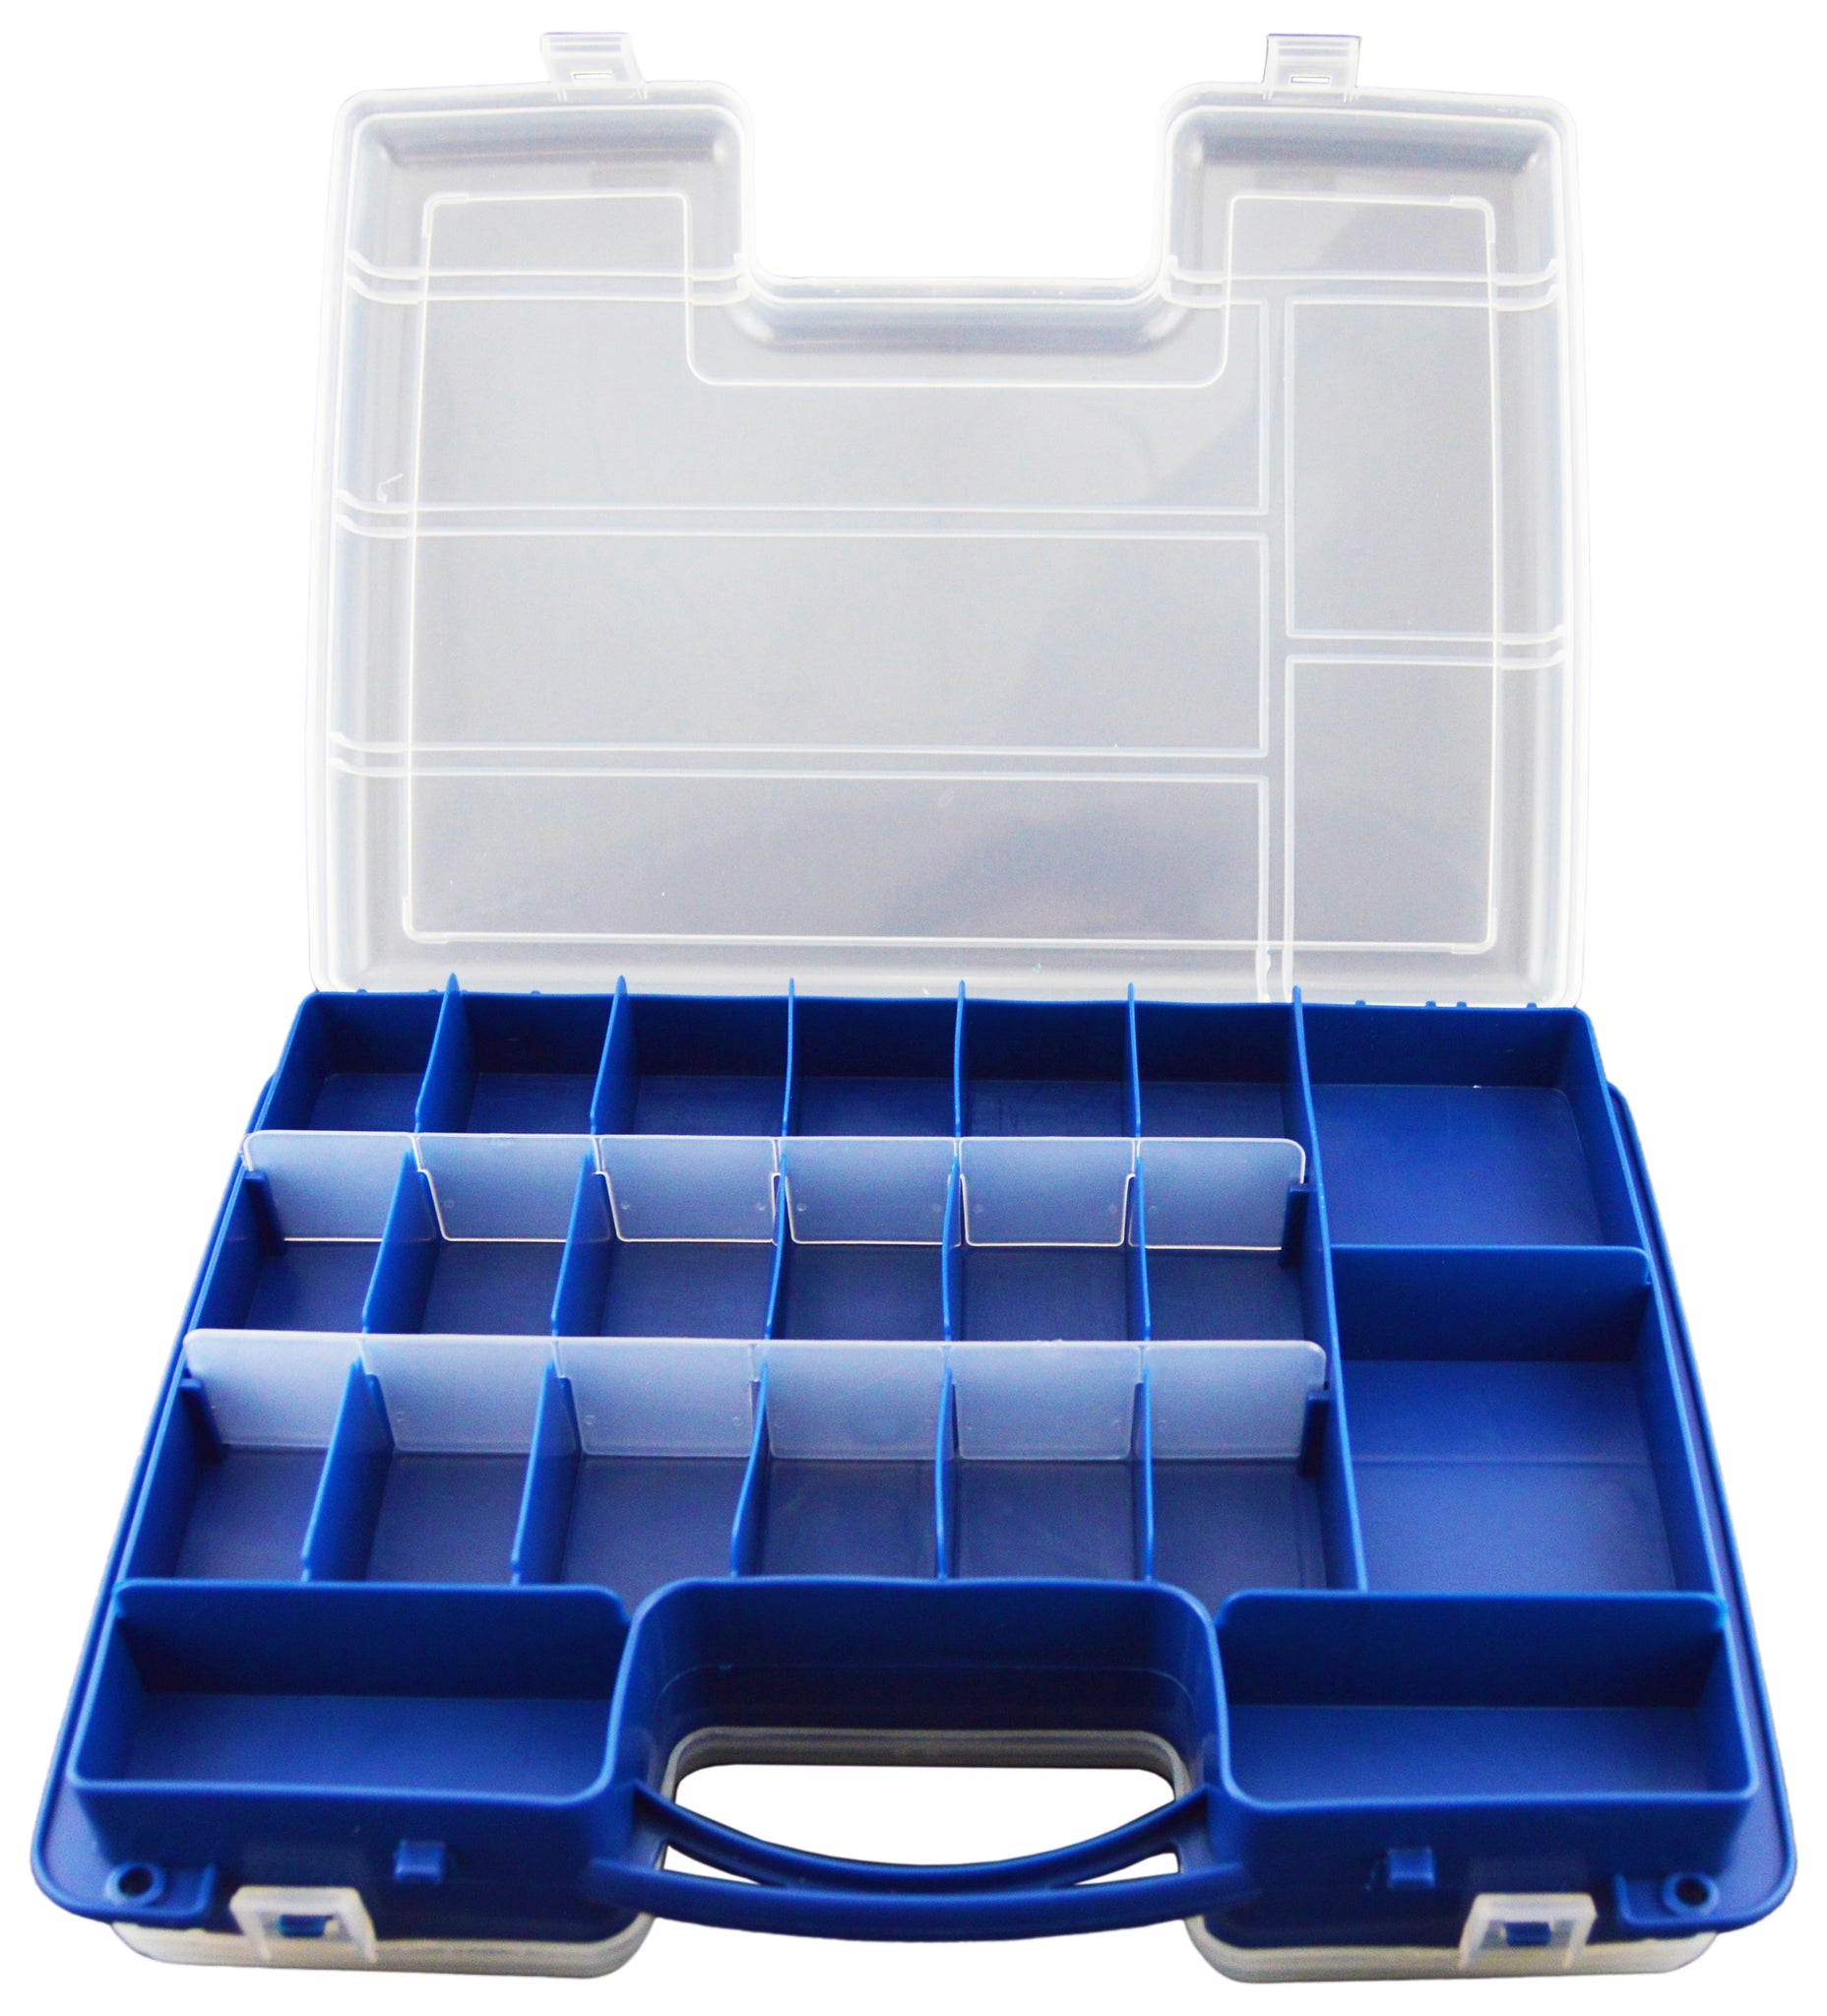 Portable Hobby Storage Box with Latching Lid and Handle, 14